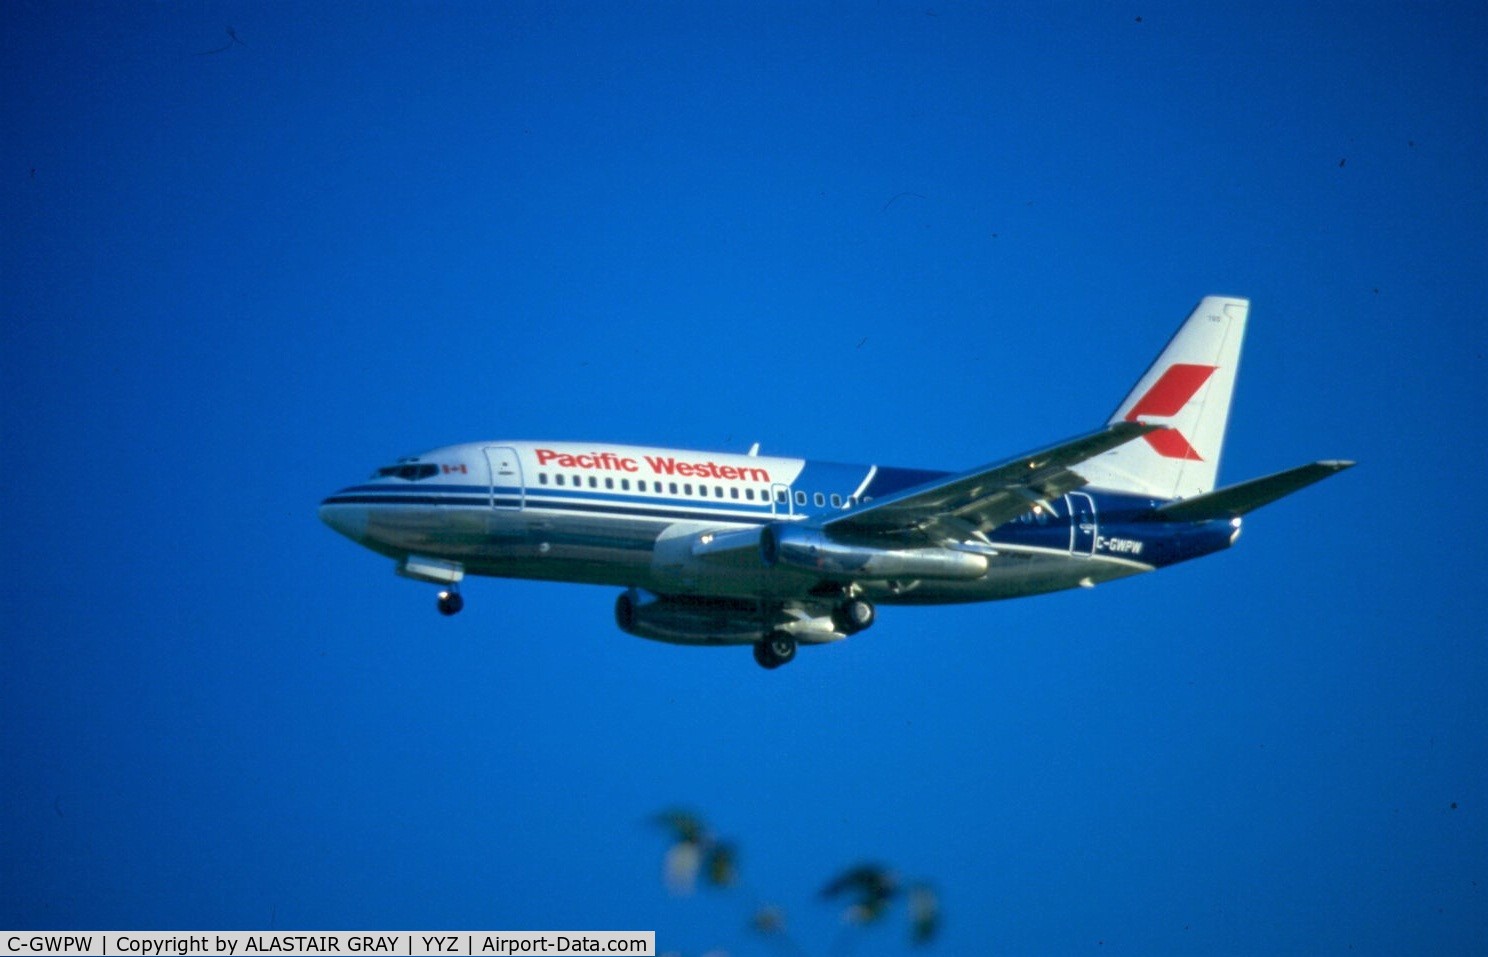 C-GWPW, 1985 Boeing 737 275 C/N 23283, Lasted two years as Pacific Western before becoming part of Canadian Airlines